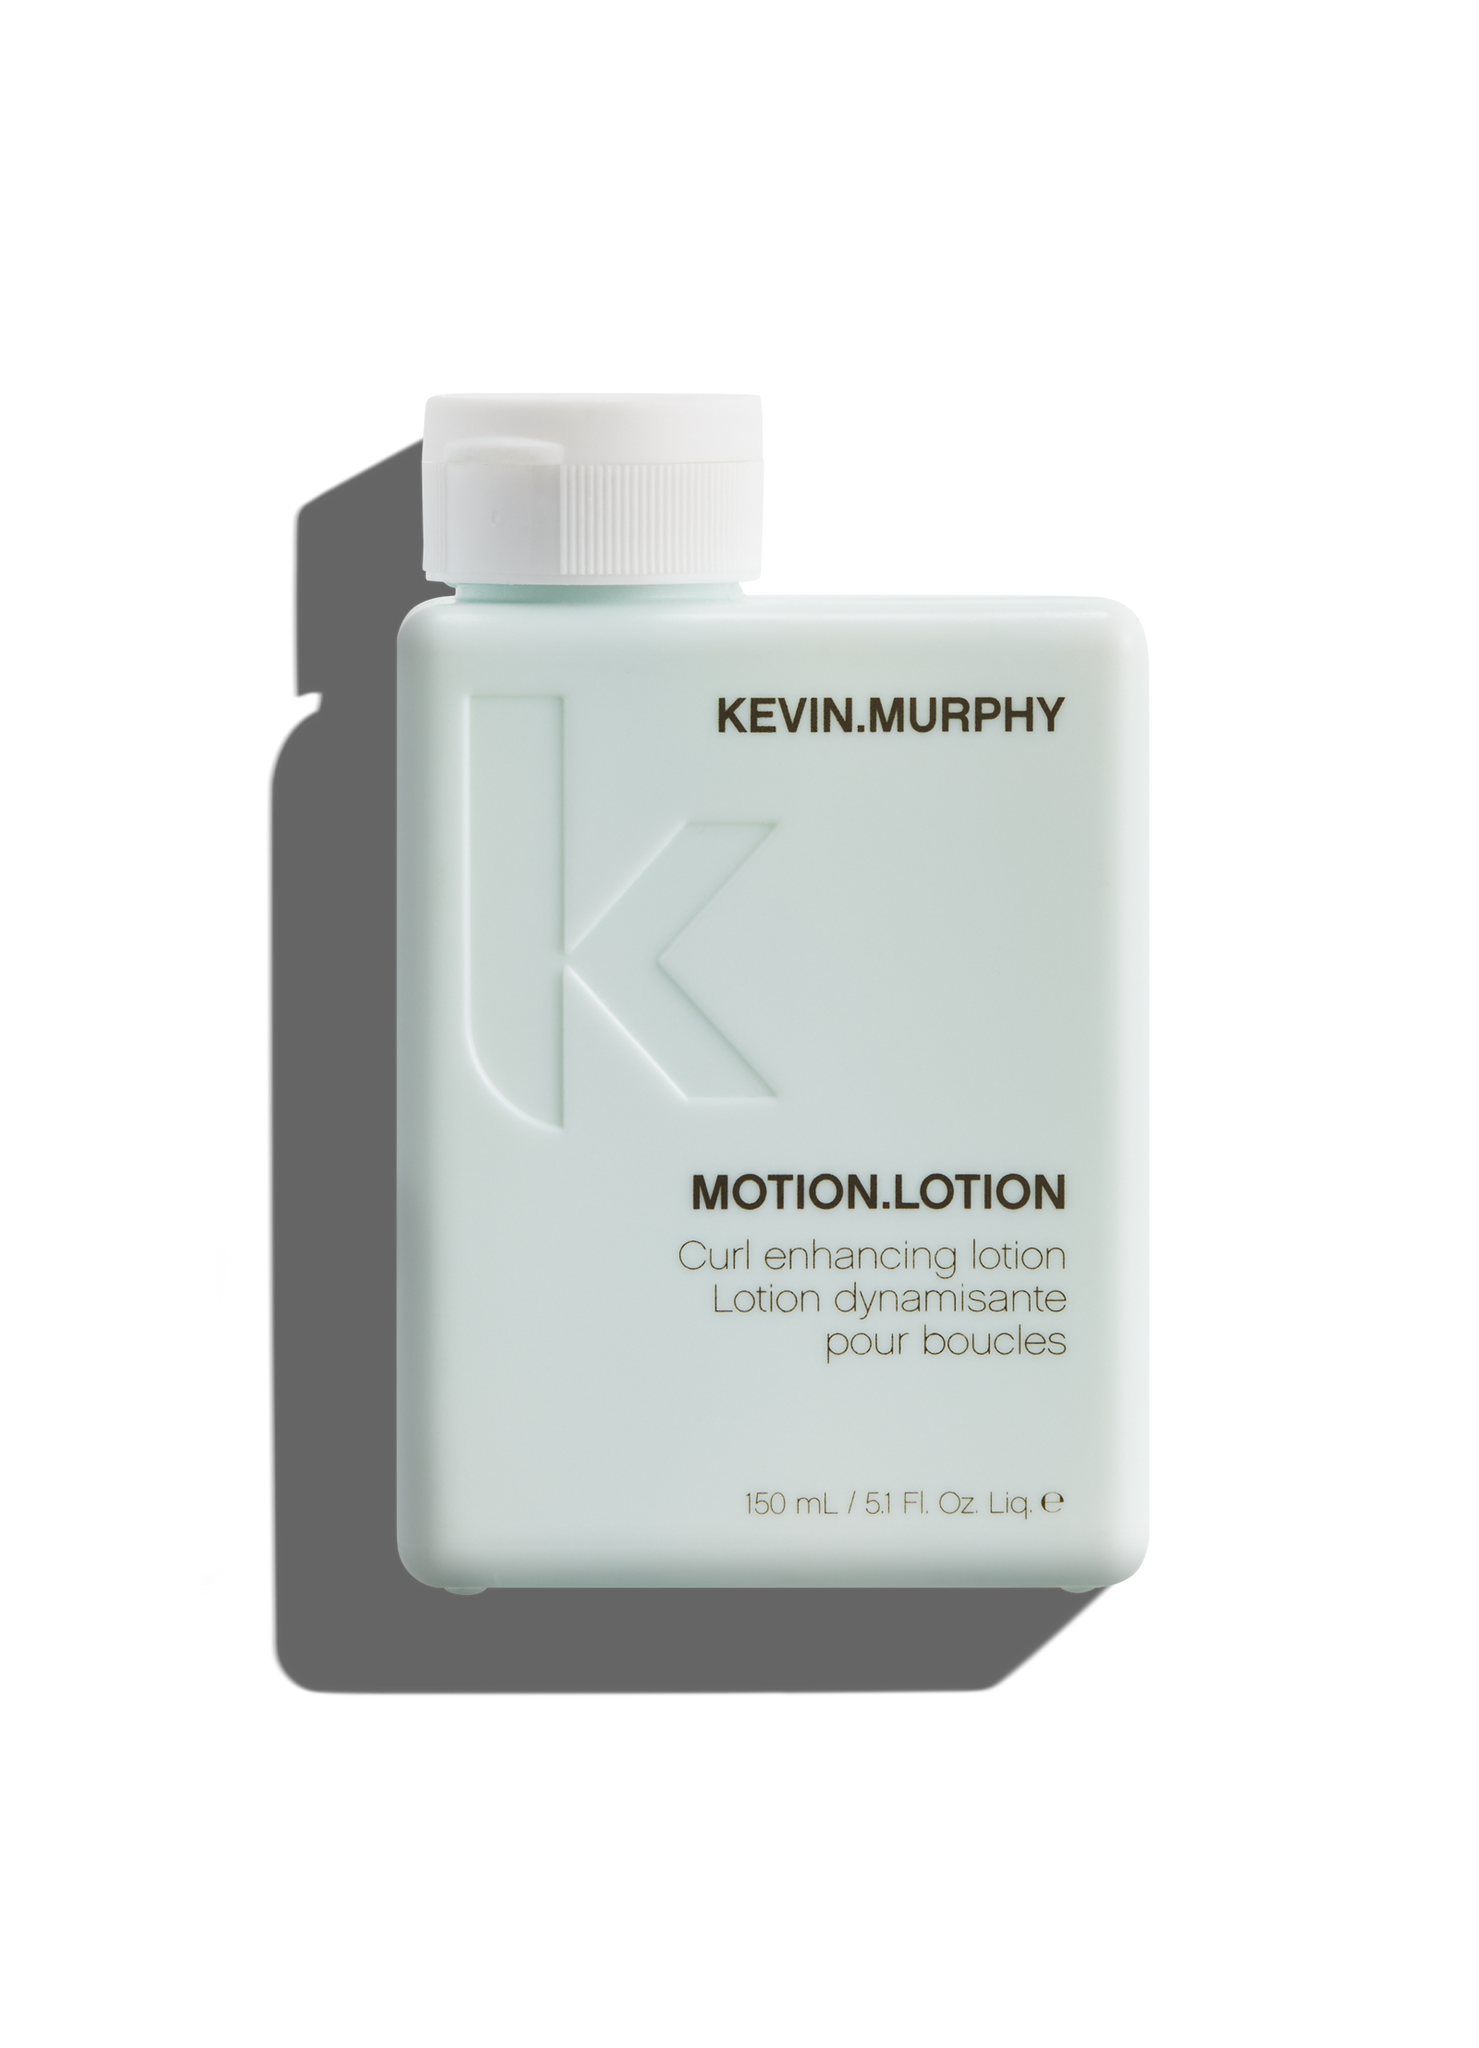 KEVIN MURPHY MOTION LOTION